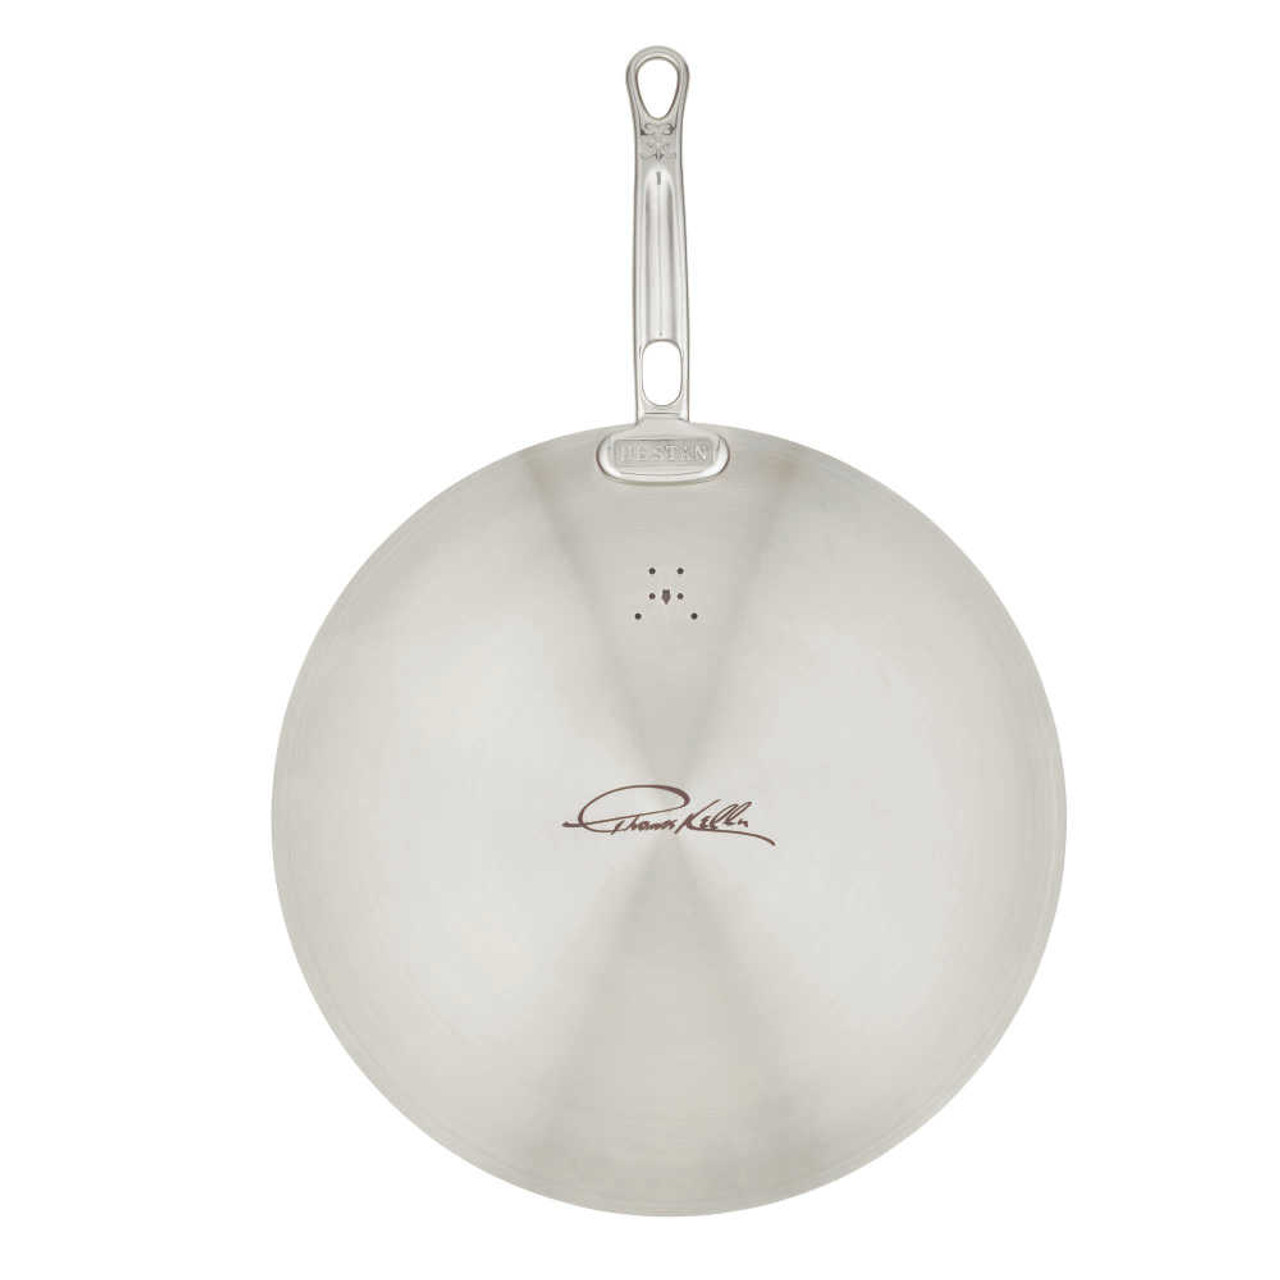 Hestan Thomas Keller Insignia Stainless Steel Frying Pans with Universal  Lid, Set of Two, 11 & 12.5-inches